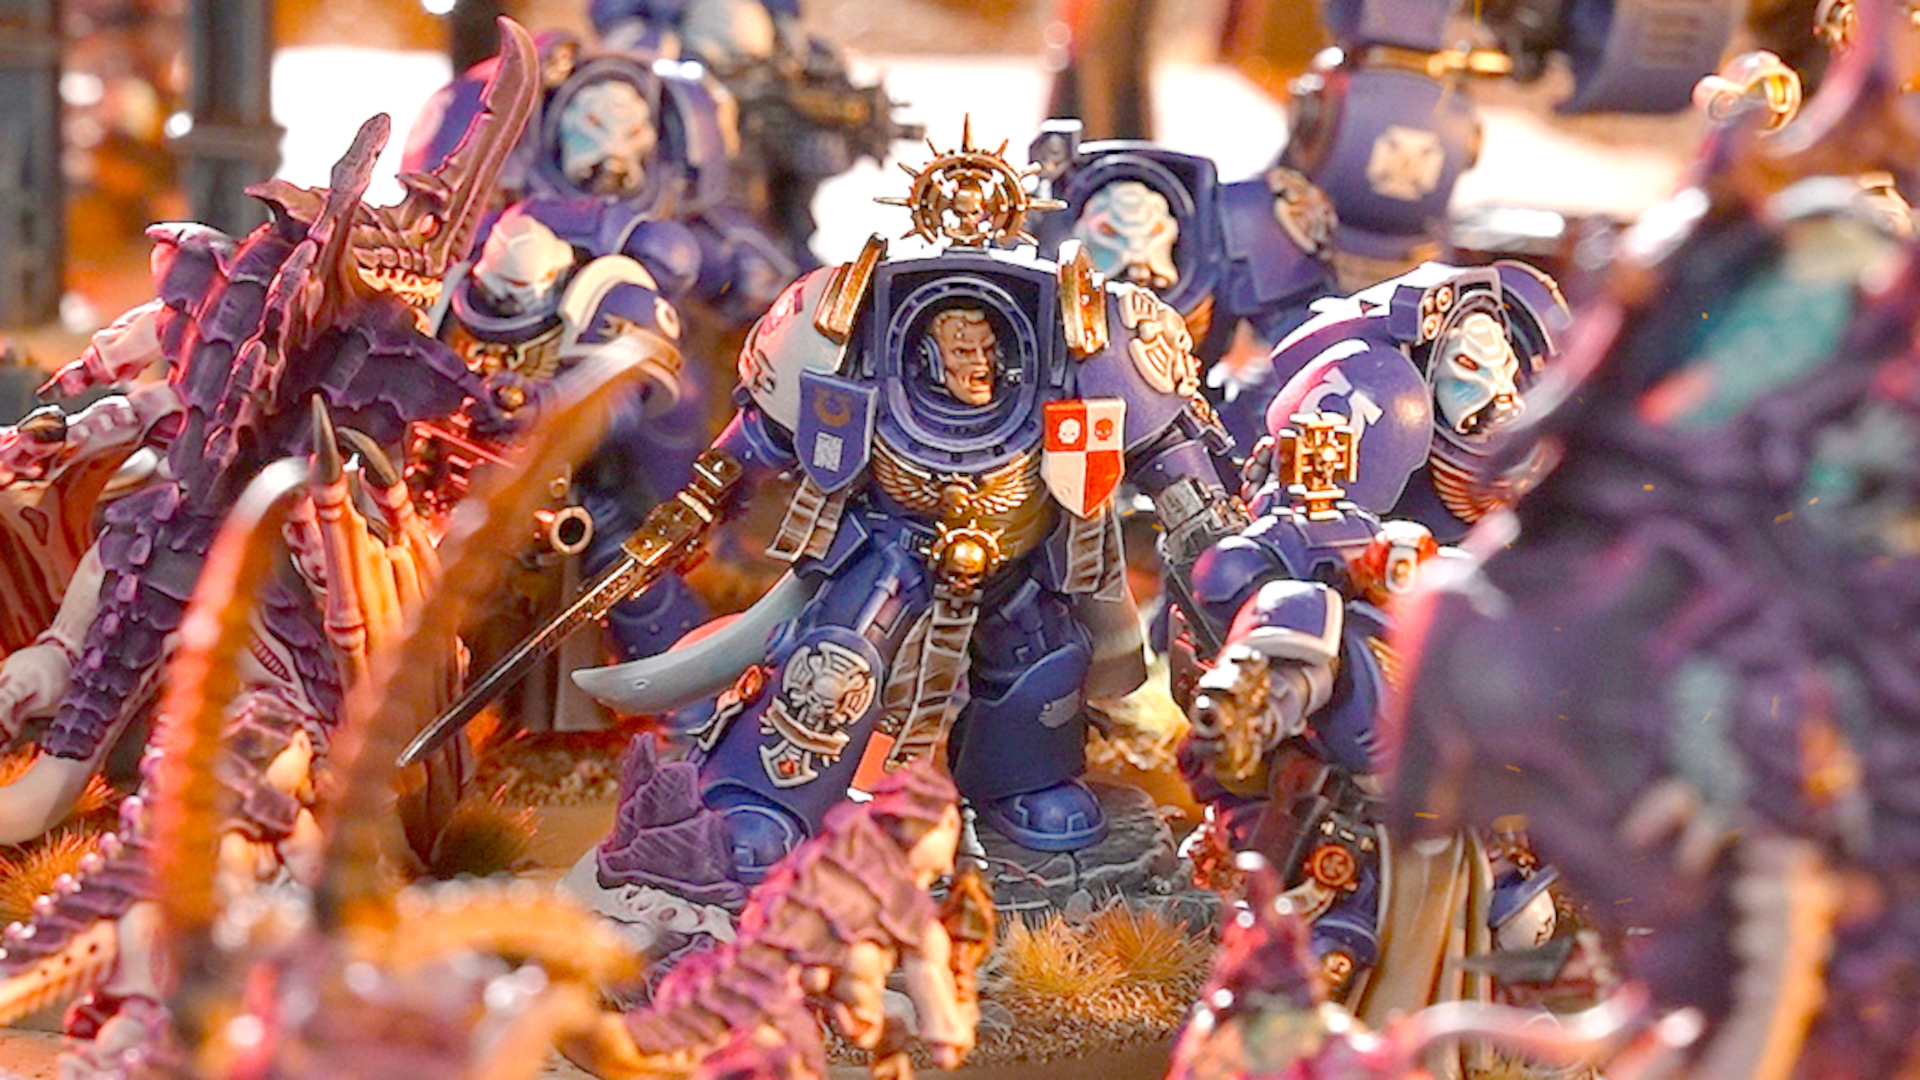 Horus Heresy Miniatures-Filled Board Game Direct From Games Workshop